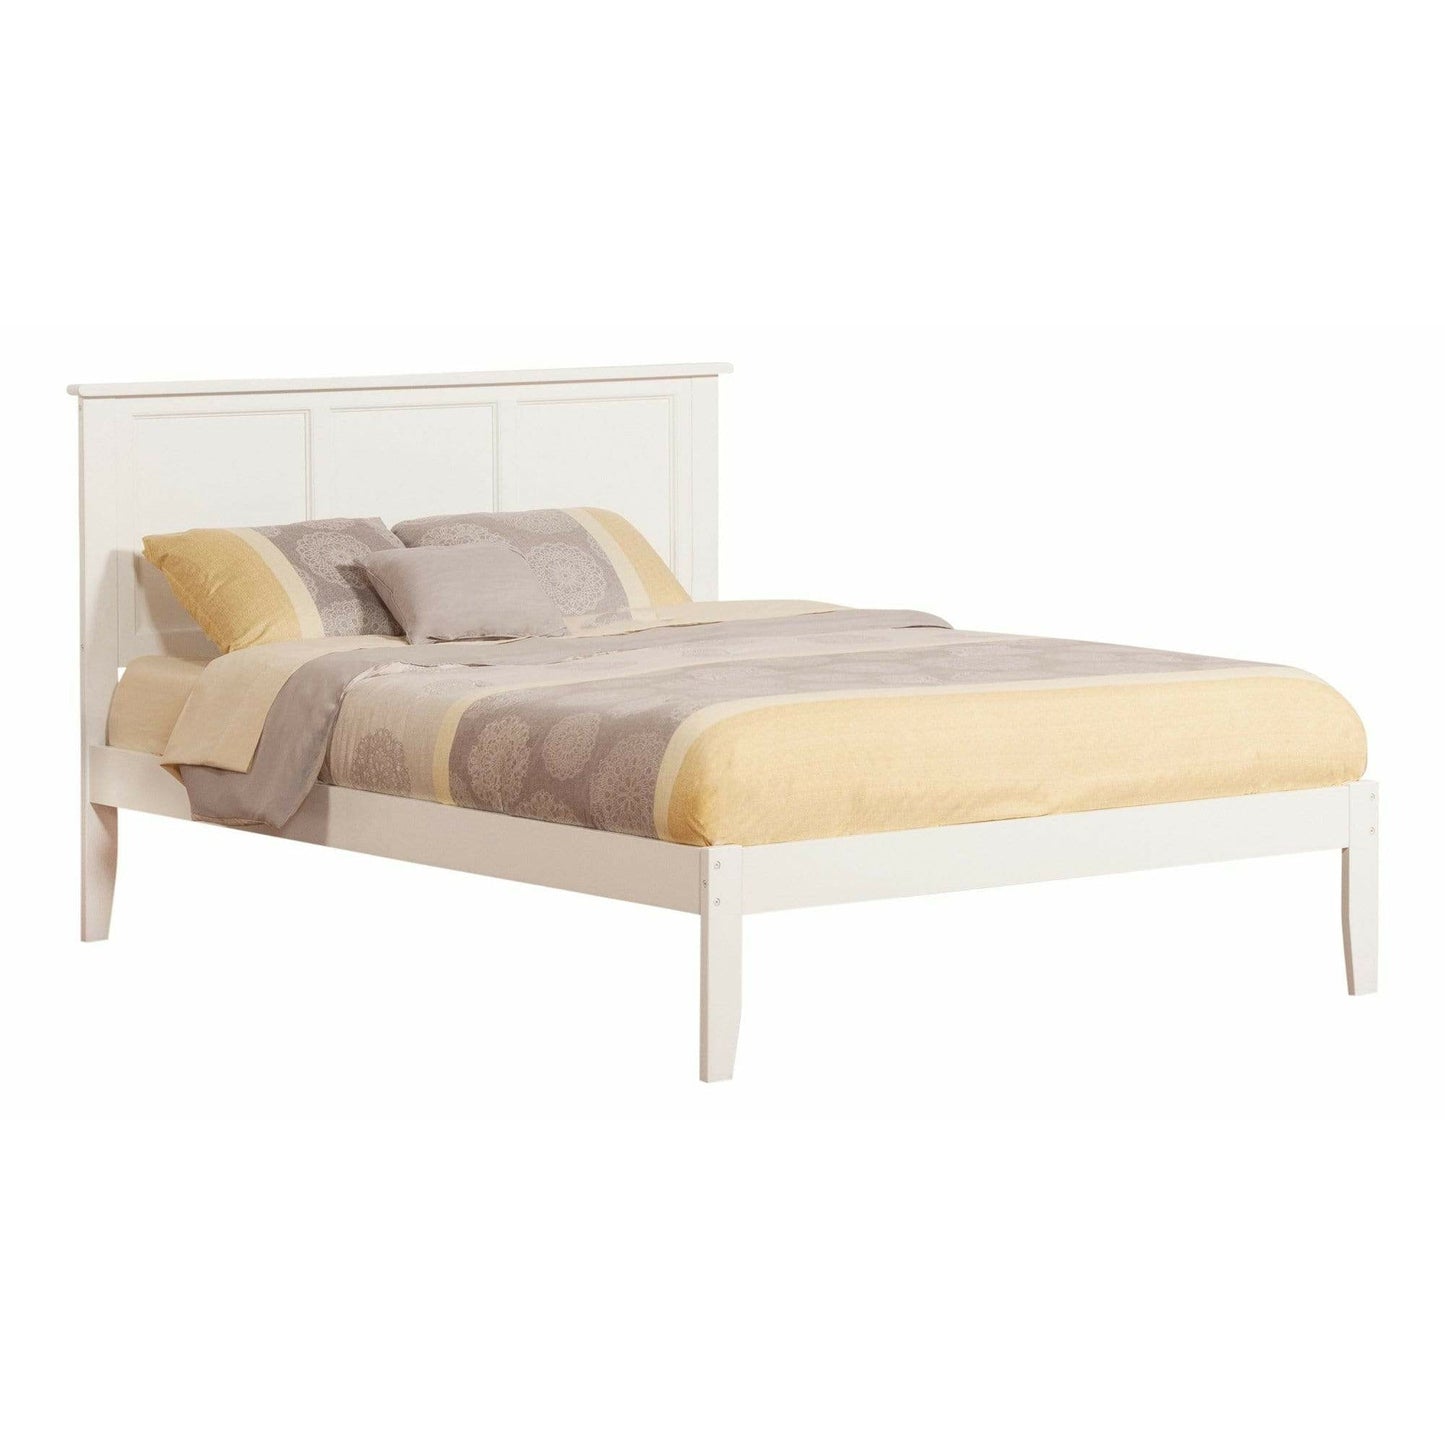 Atlantic Furniture Bed White Madison King Platform Bed with Open Foot Board in Espresso